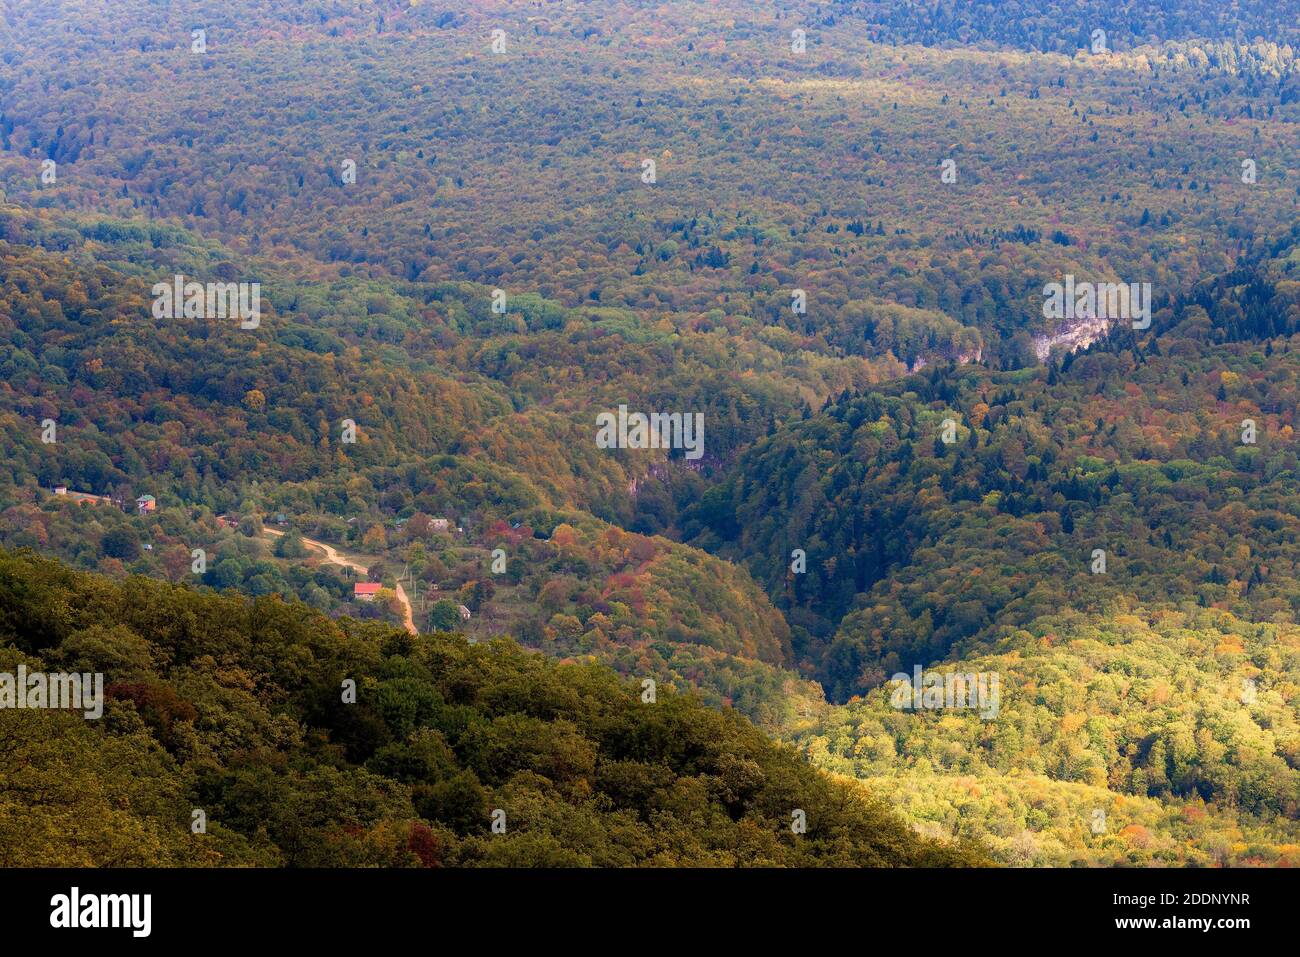 Mountain landscape. Gorge and mountains covered by forest. Stock Photo